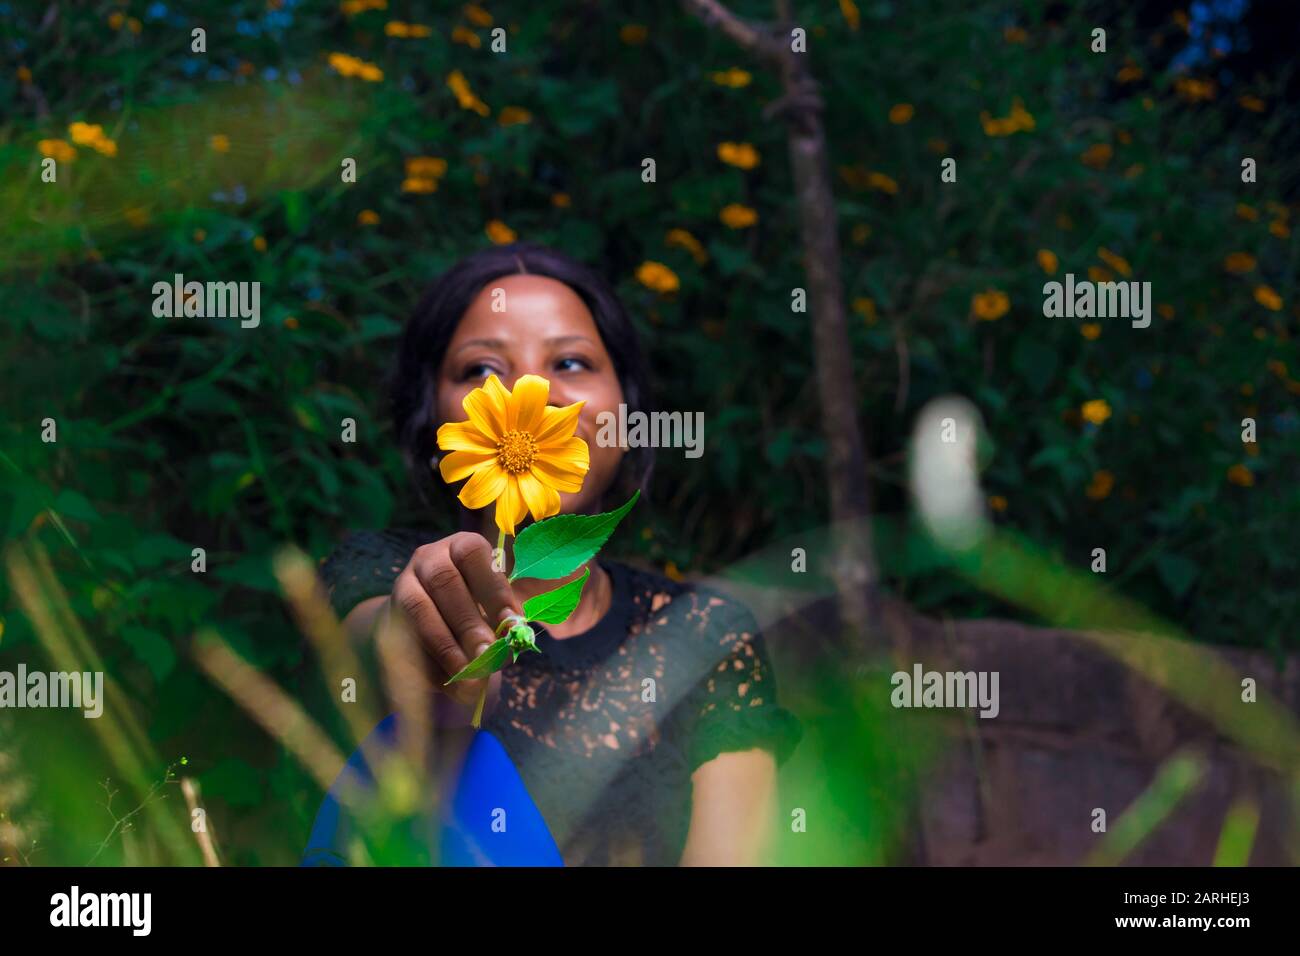 black girl holding a tree marigold flower sitting in a garden alone Stock Photo